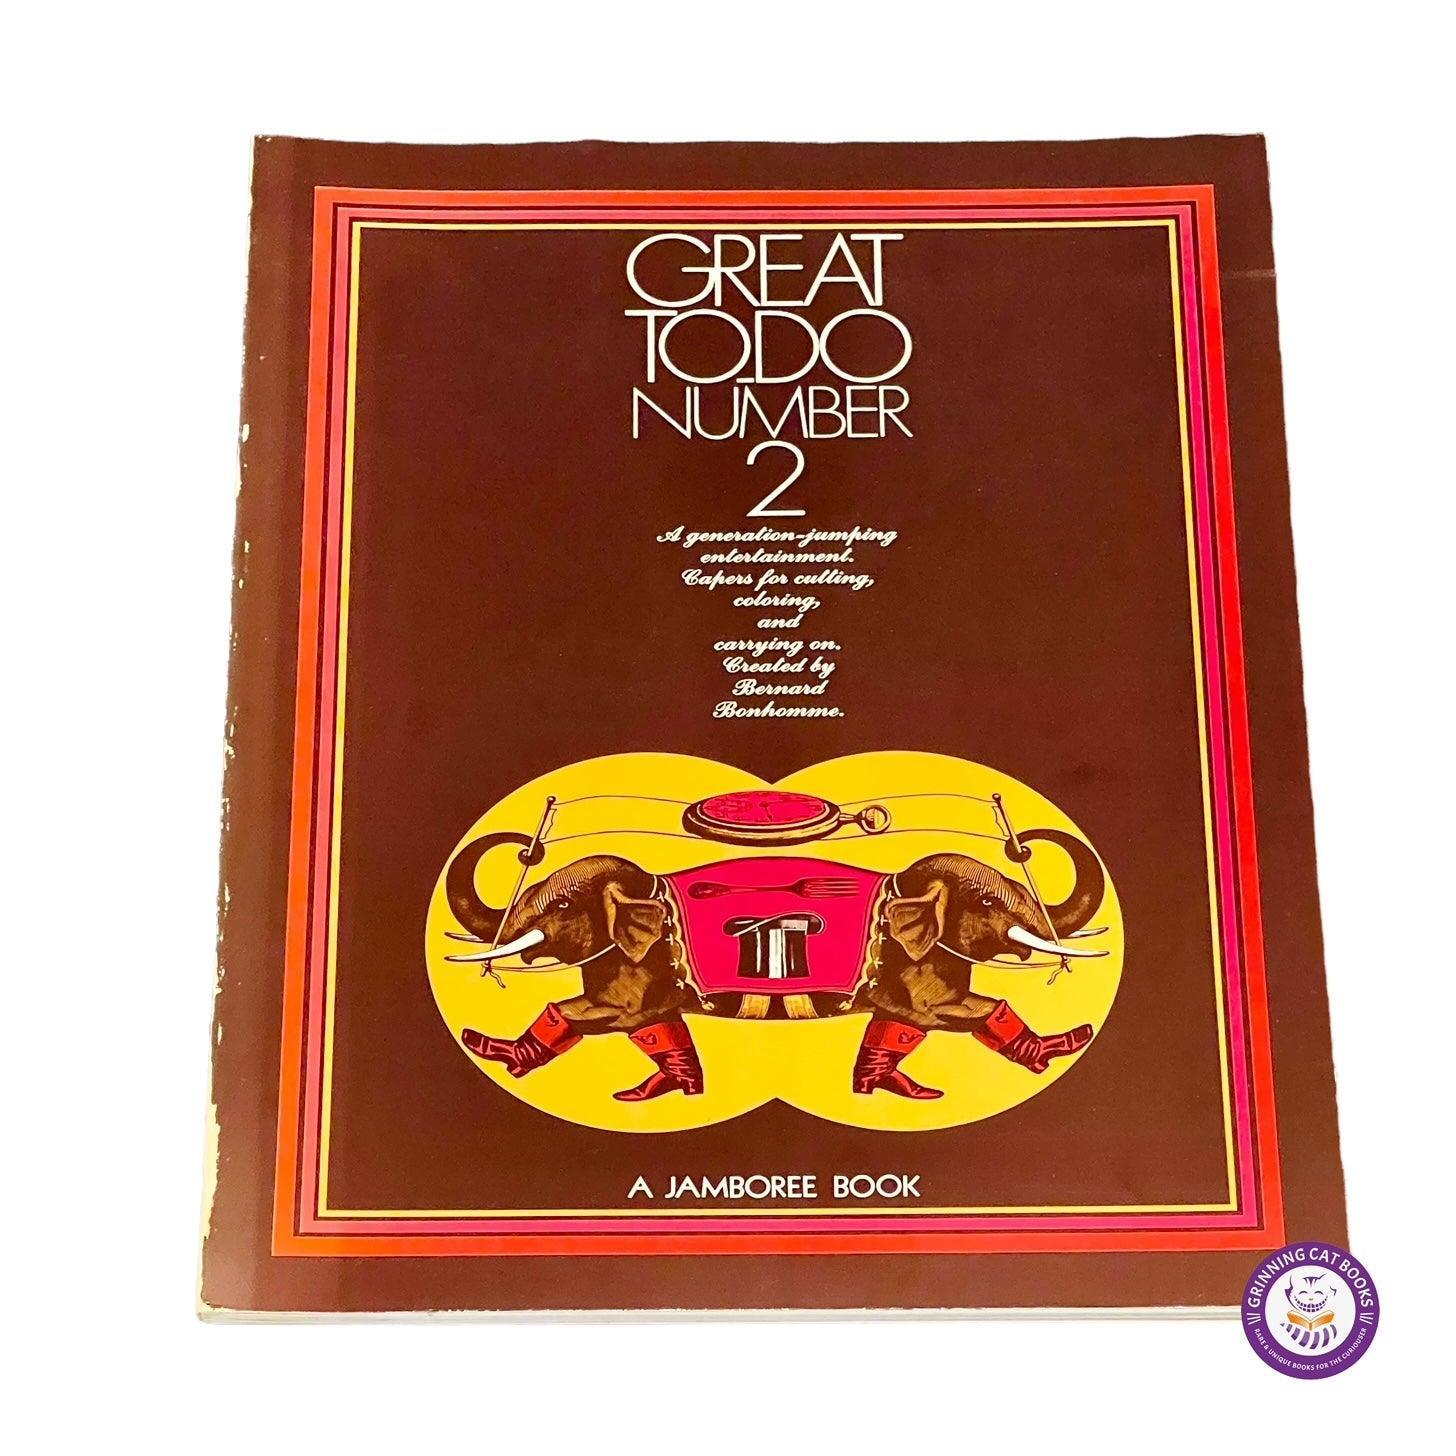 Great To-Do (Vols. 1-4): A Generation-jumping Entertainment - Grinning Cat Books - GAMES - GAMES, PUZZLES